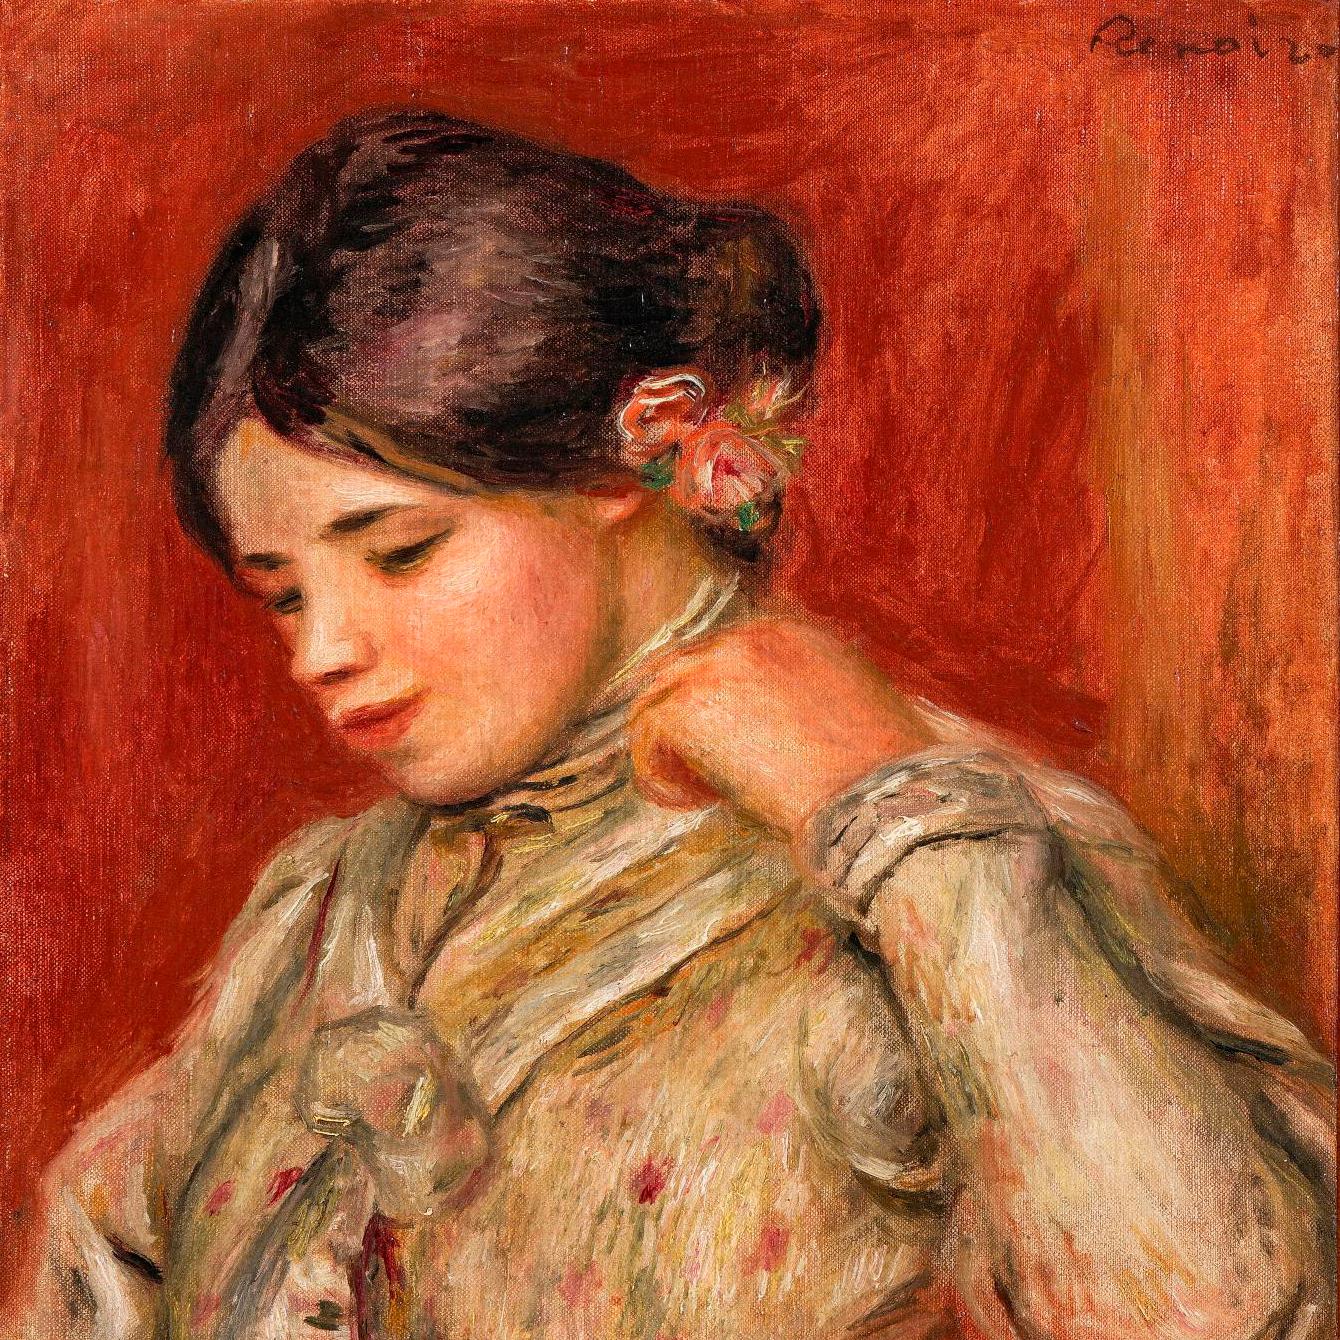 A Young Woman in the Sun by Renoir - Pre-sale